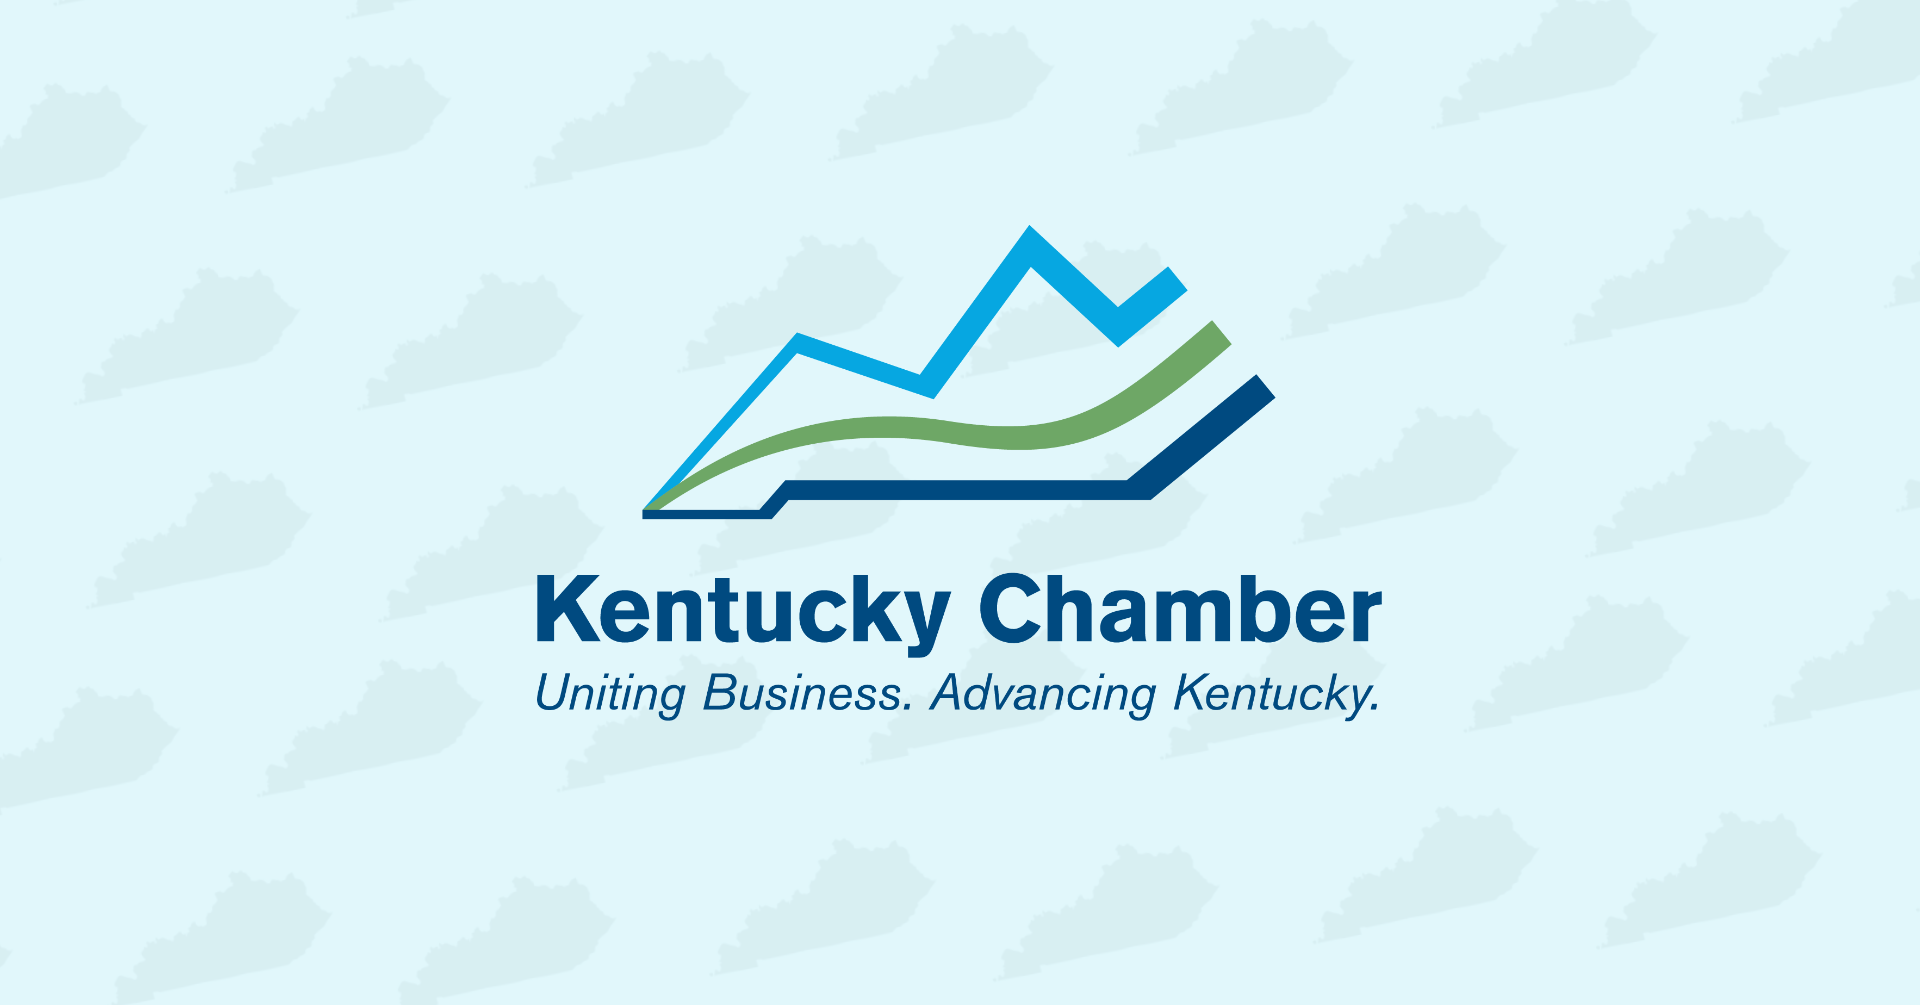 Kentucky Chamber Compiles A List Of Recovery Resources And Donation